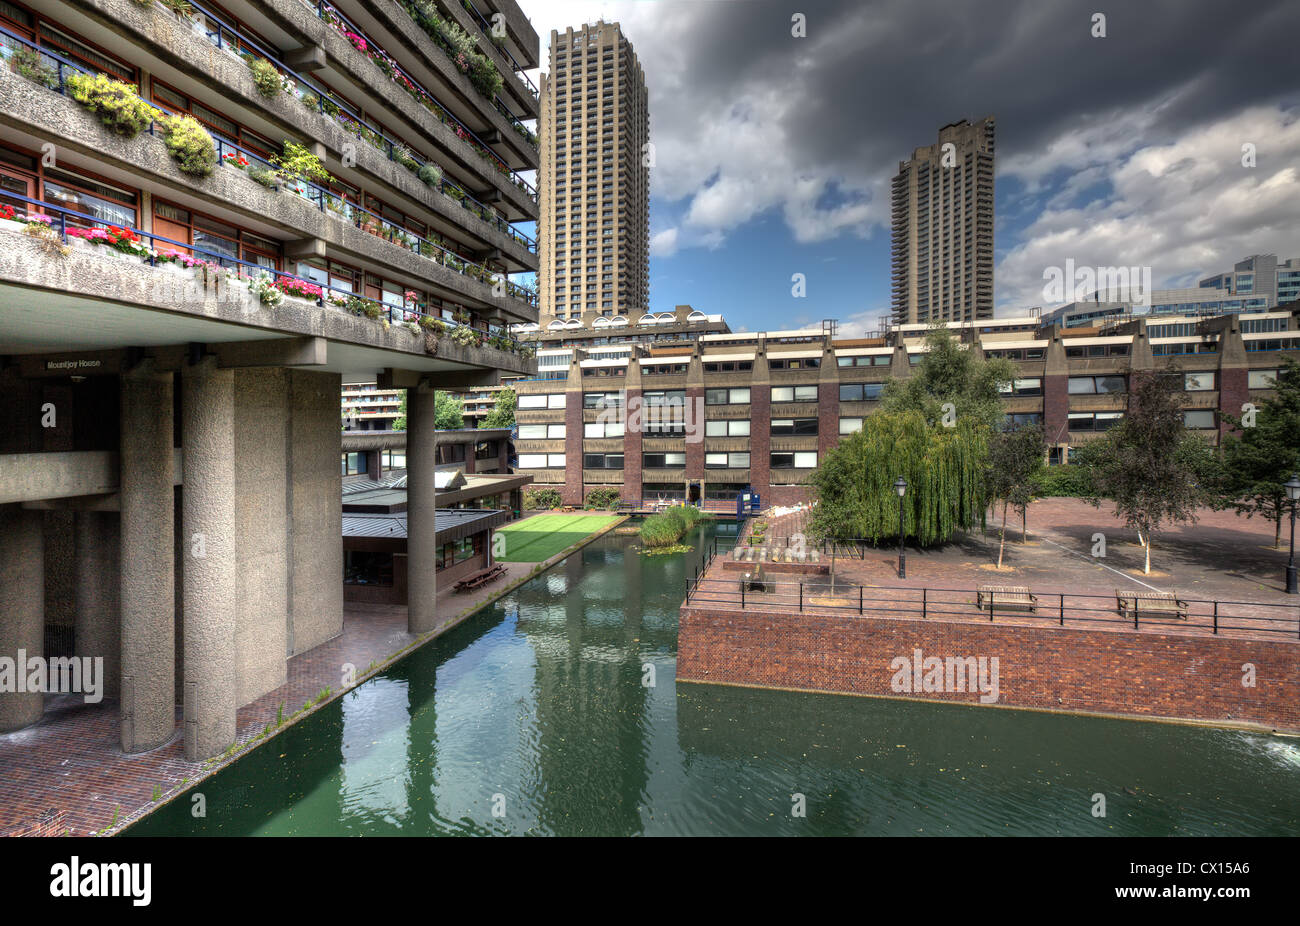 The Barbican Center in London, one of the most famous examples of Brutalist architecture to be found. Stock Photo